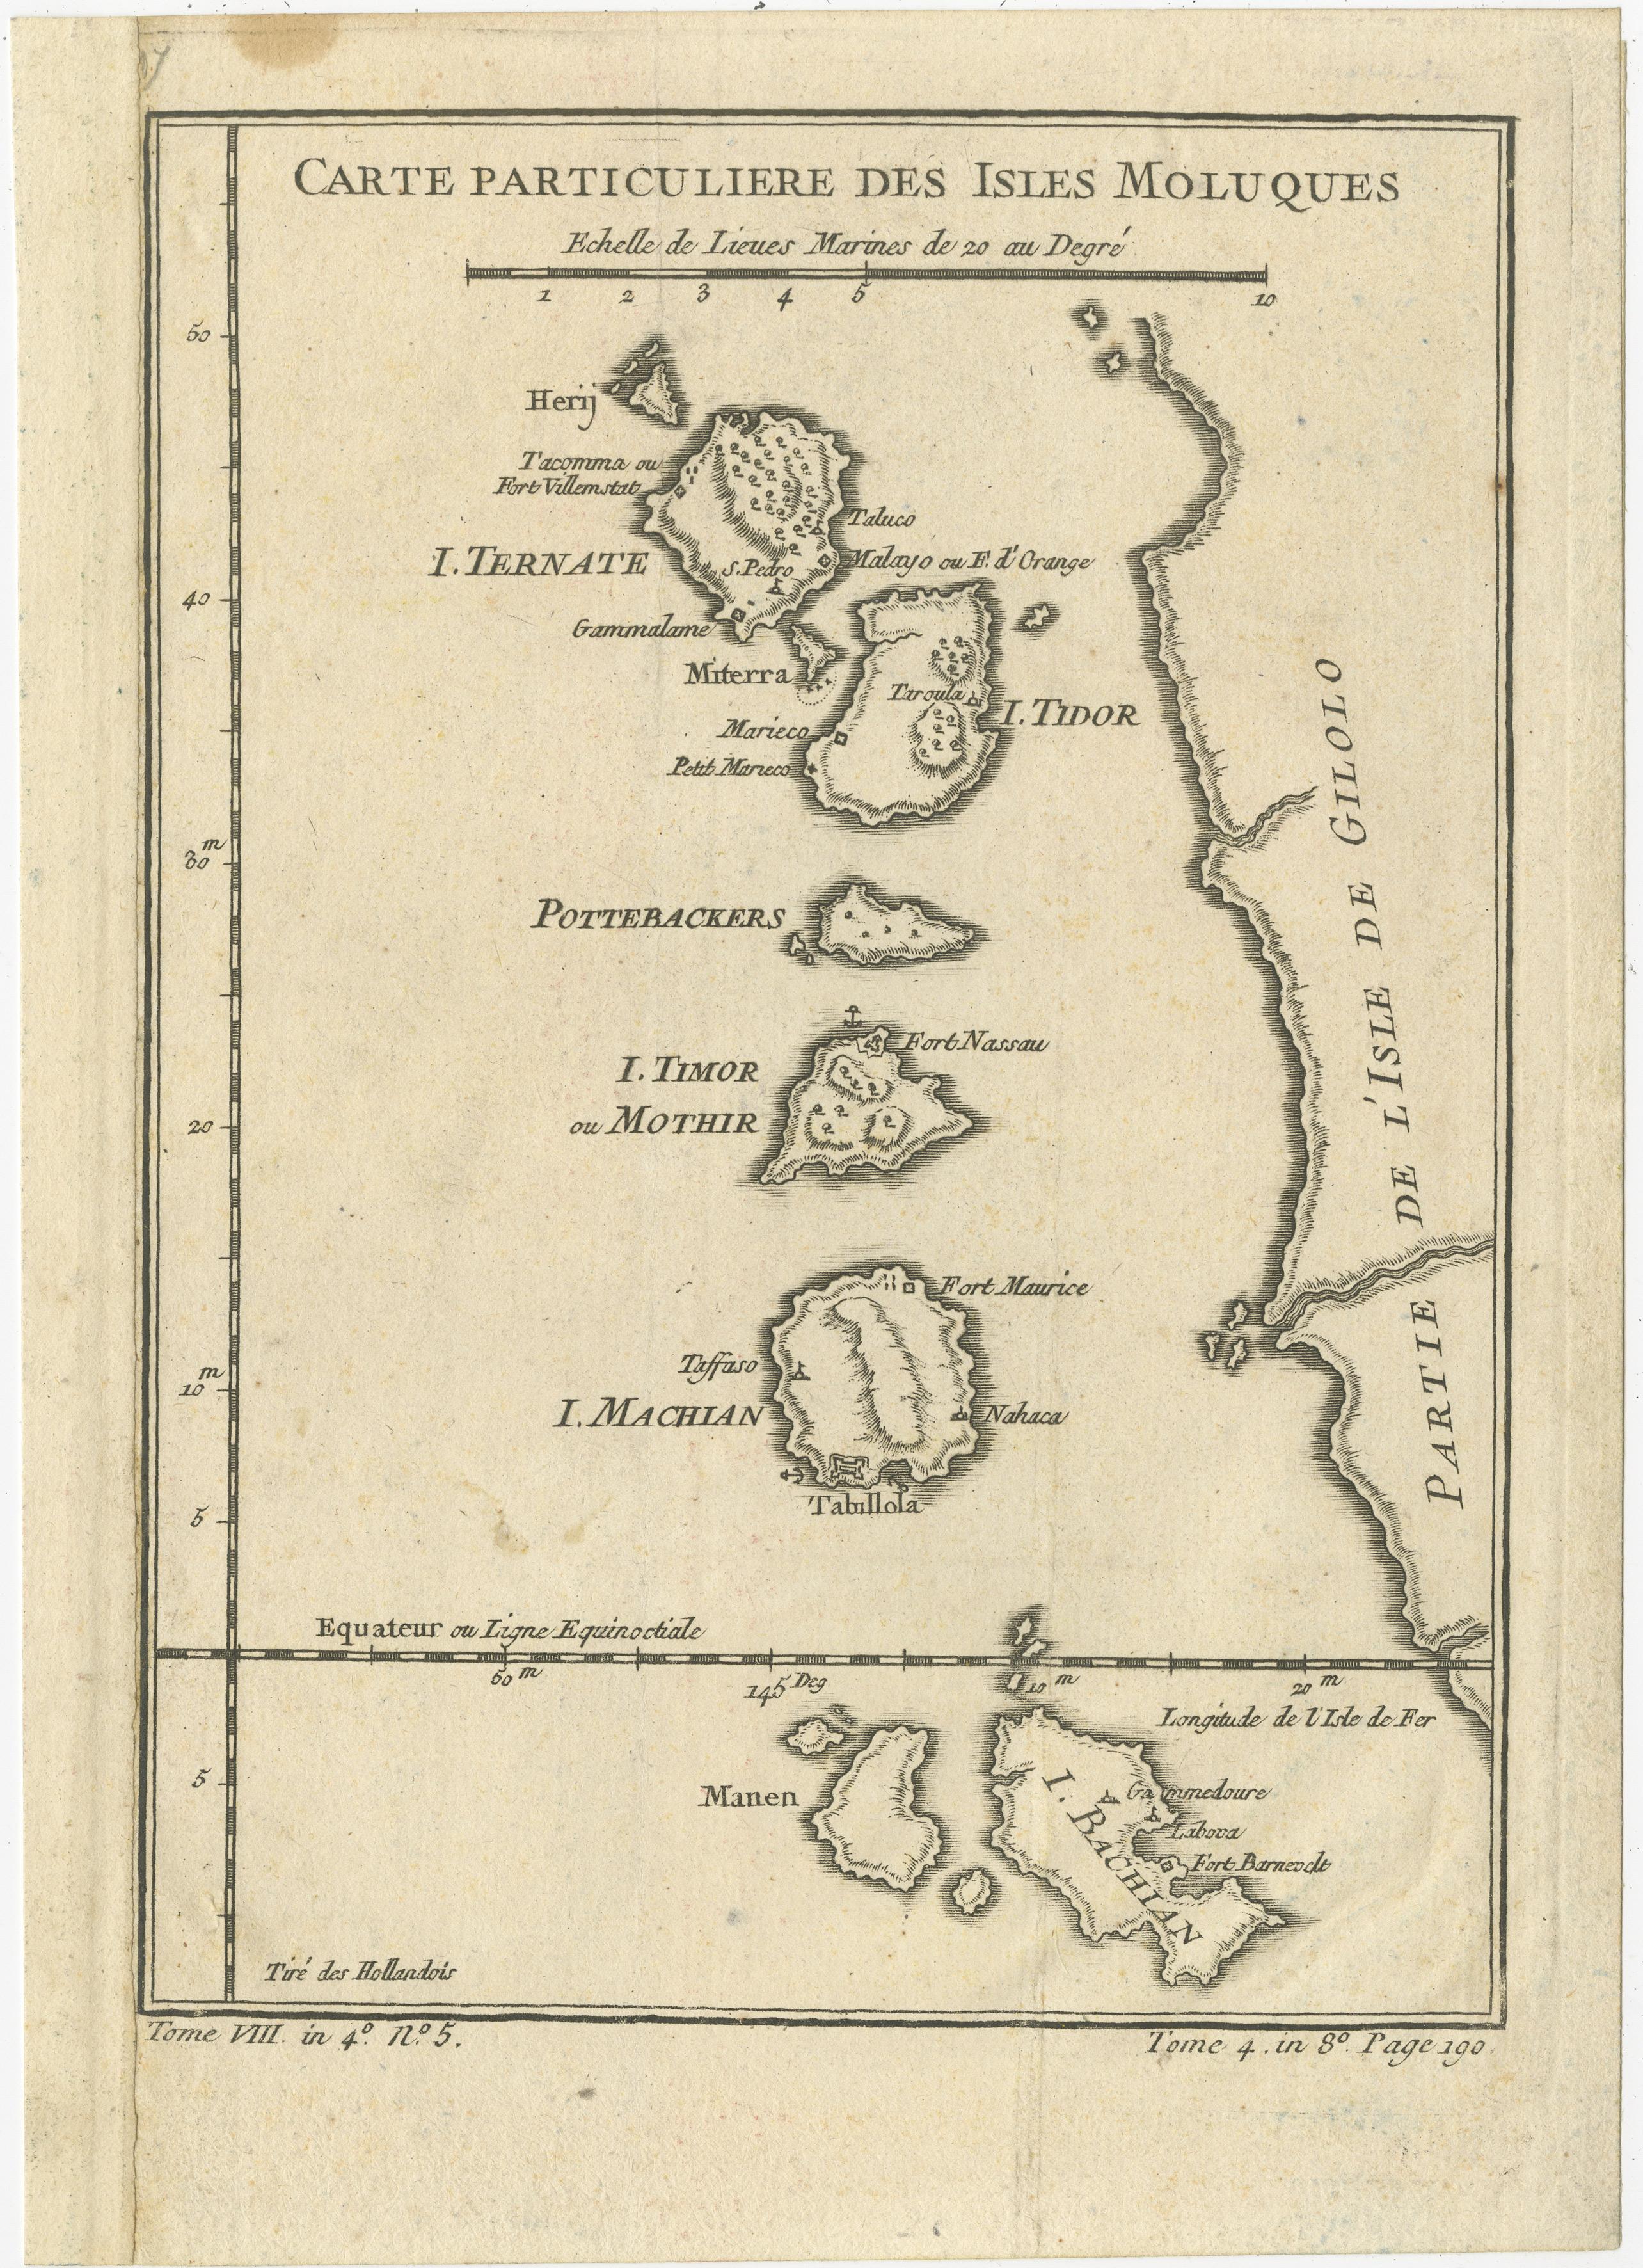 Antique map titled 'Carte Particuliere des Isles Moluques'. This map depicts the islands of Herij, Ternate, Tidor, Pottebackers, Timor, Machian and Bachian. The Moluccan islands were once part of the Dutch East Indies. Today the Moluccas are part of